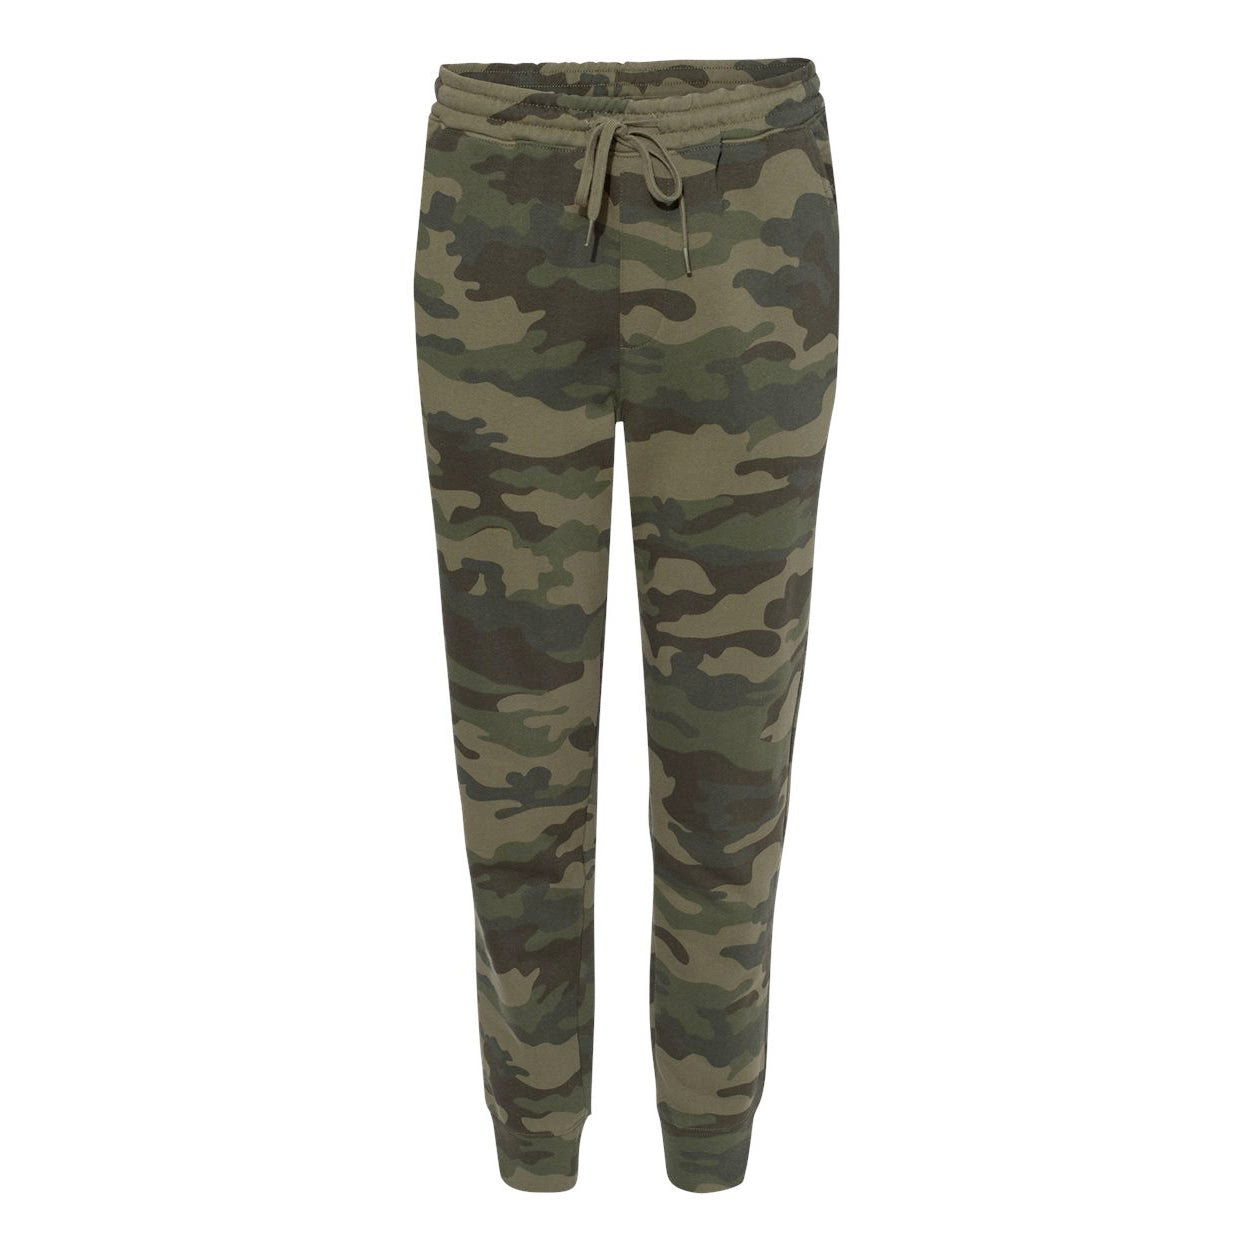 LEAD PIPE JOGGERS / DEEP FOREST CAMO French Terry Knit Joggers By Robert James